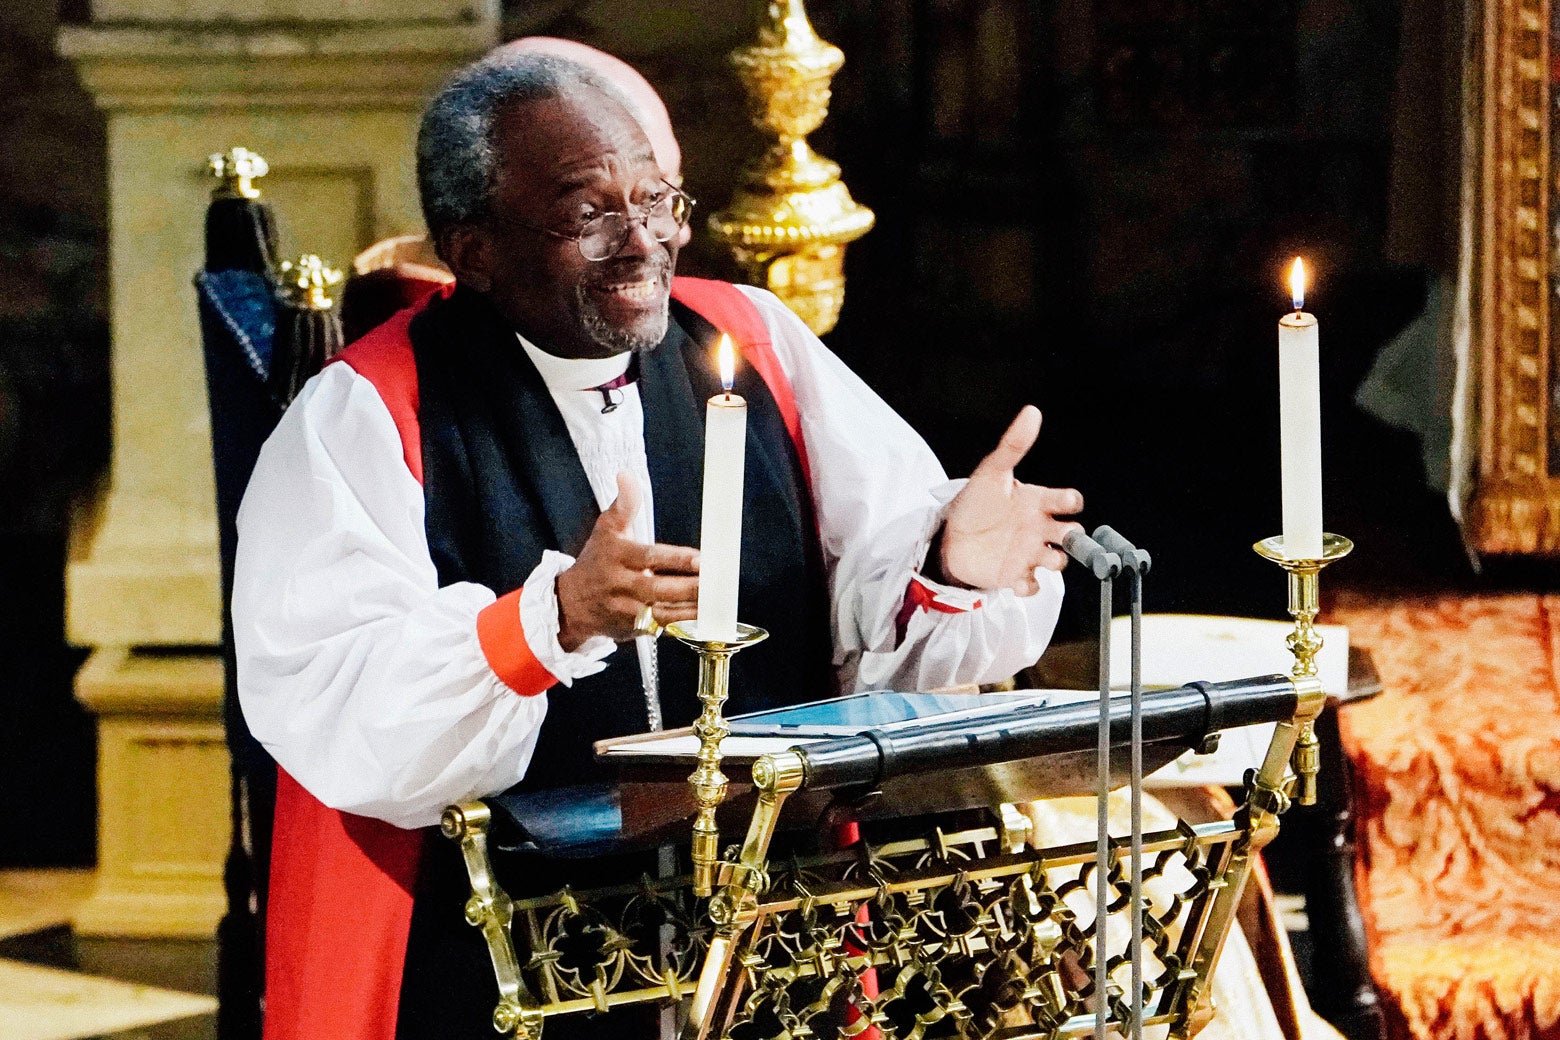 Bishop Michael Curry delivers his sermon at the royal wedding.